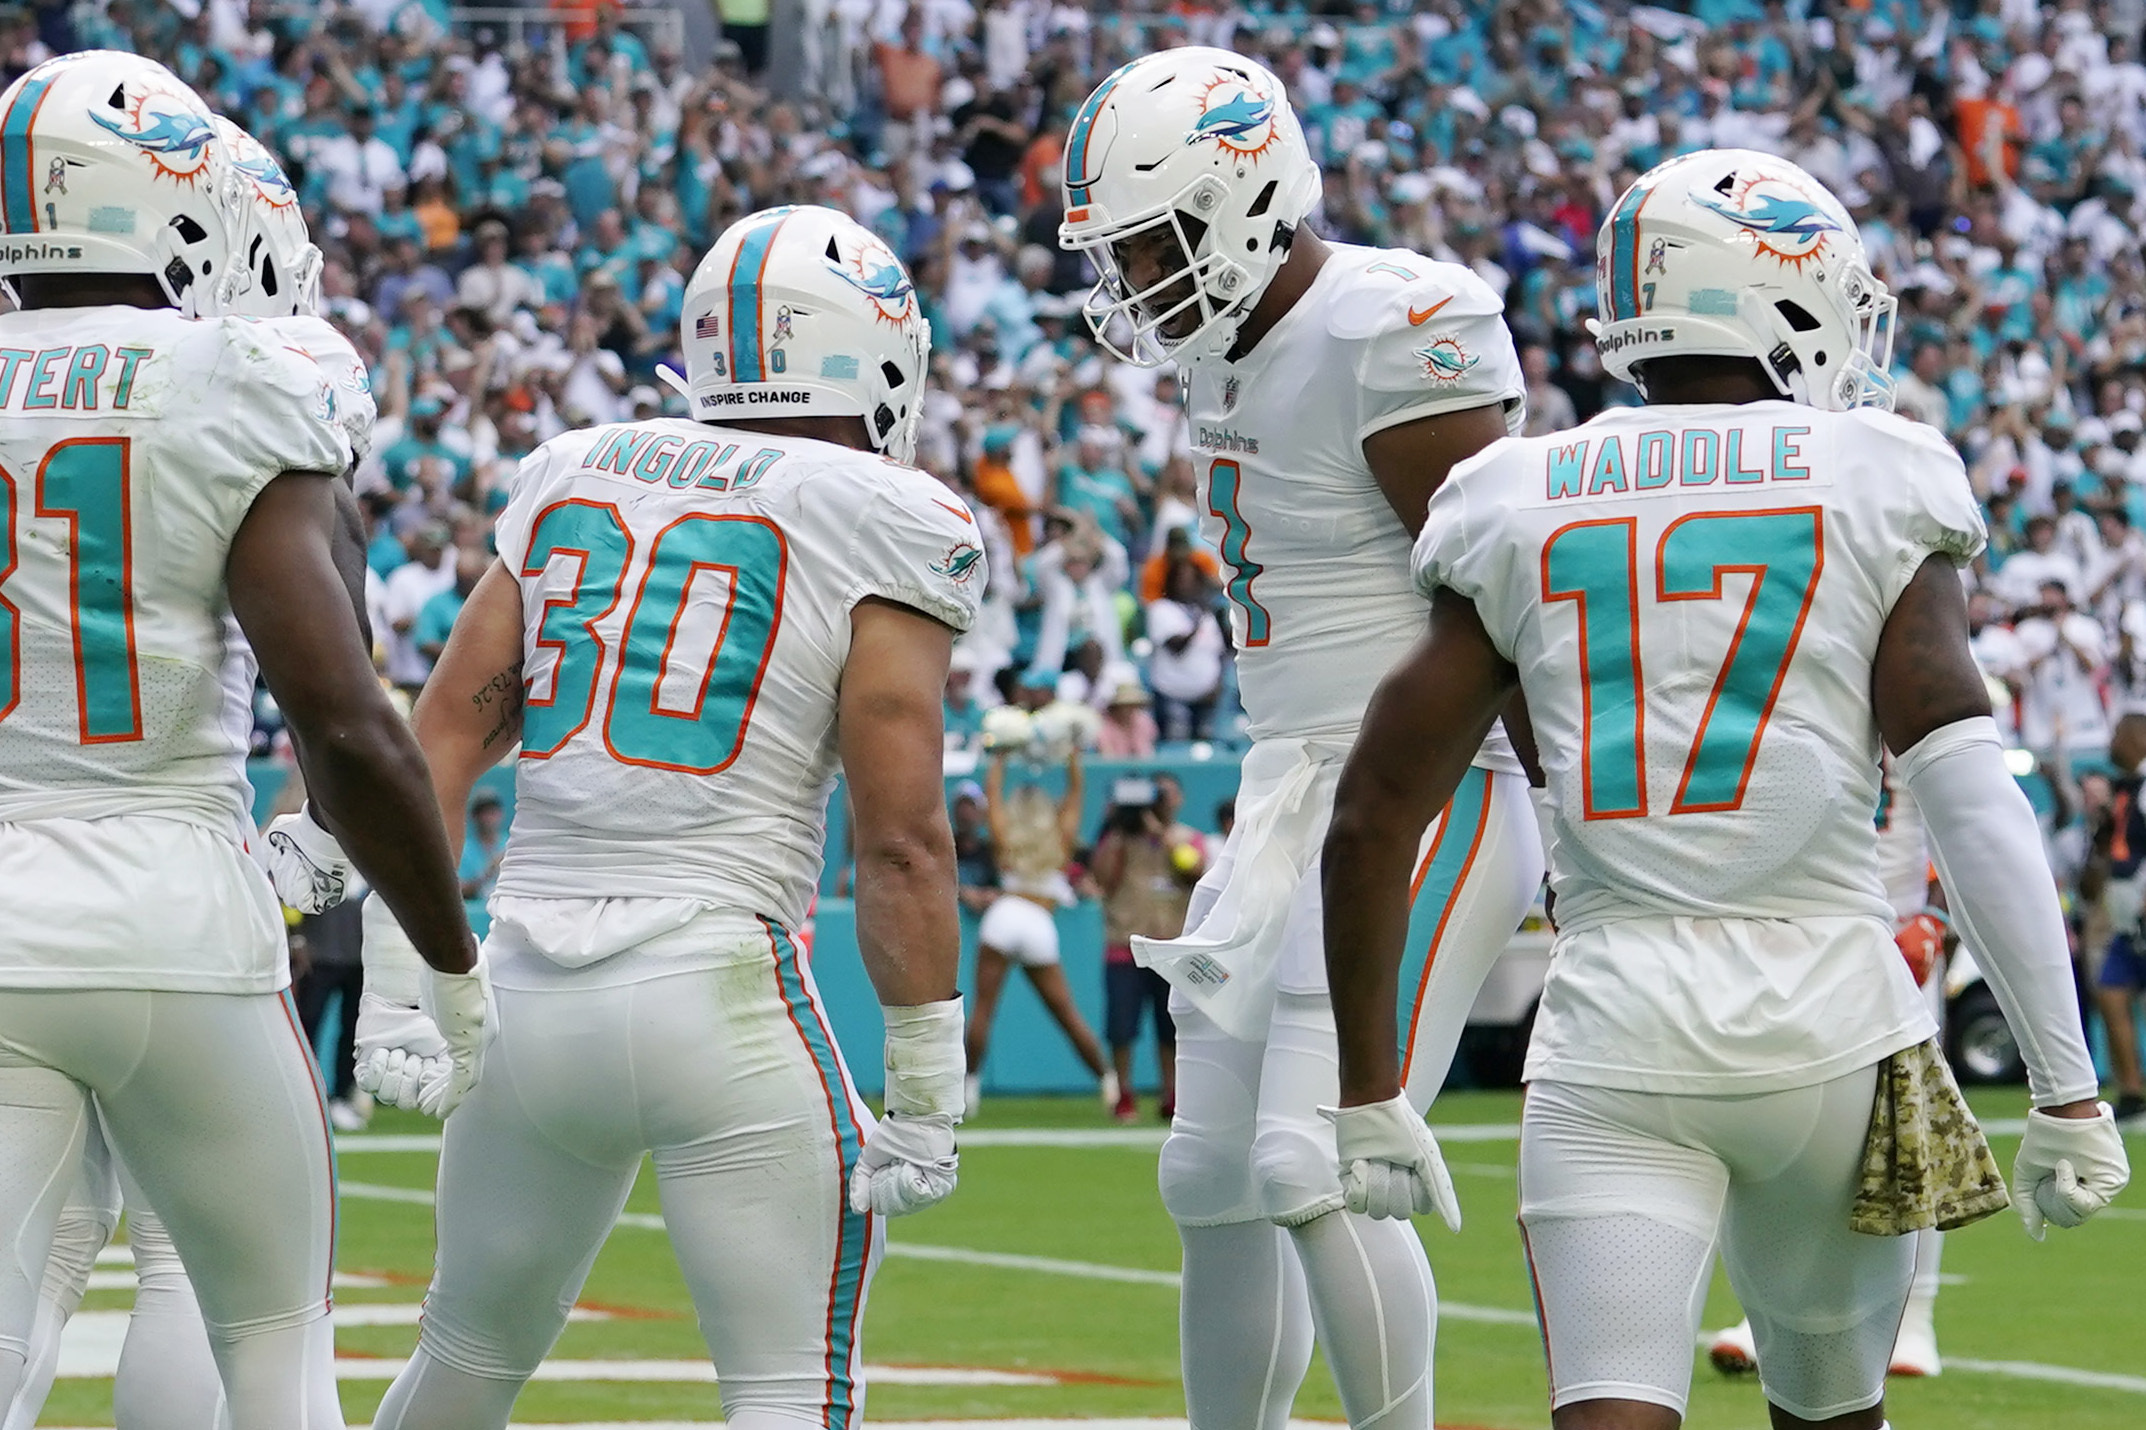 dolphins all white uniforms